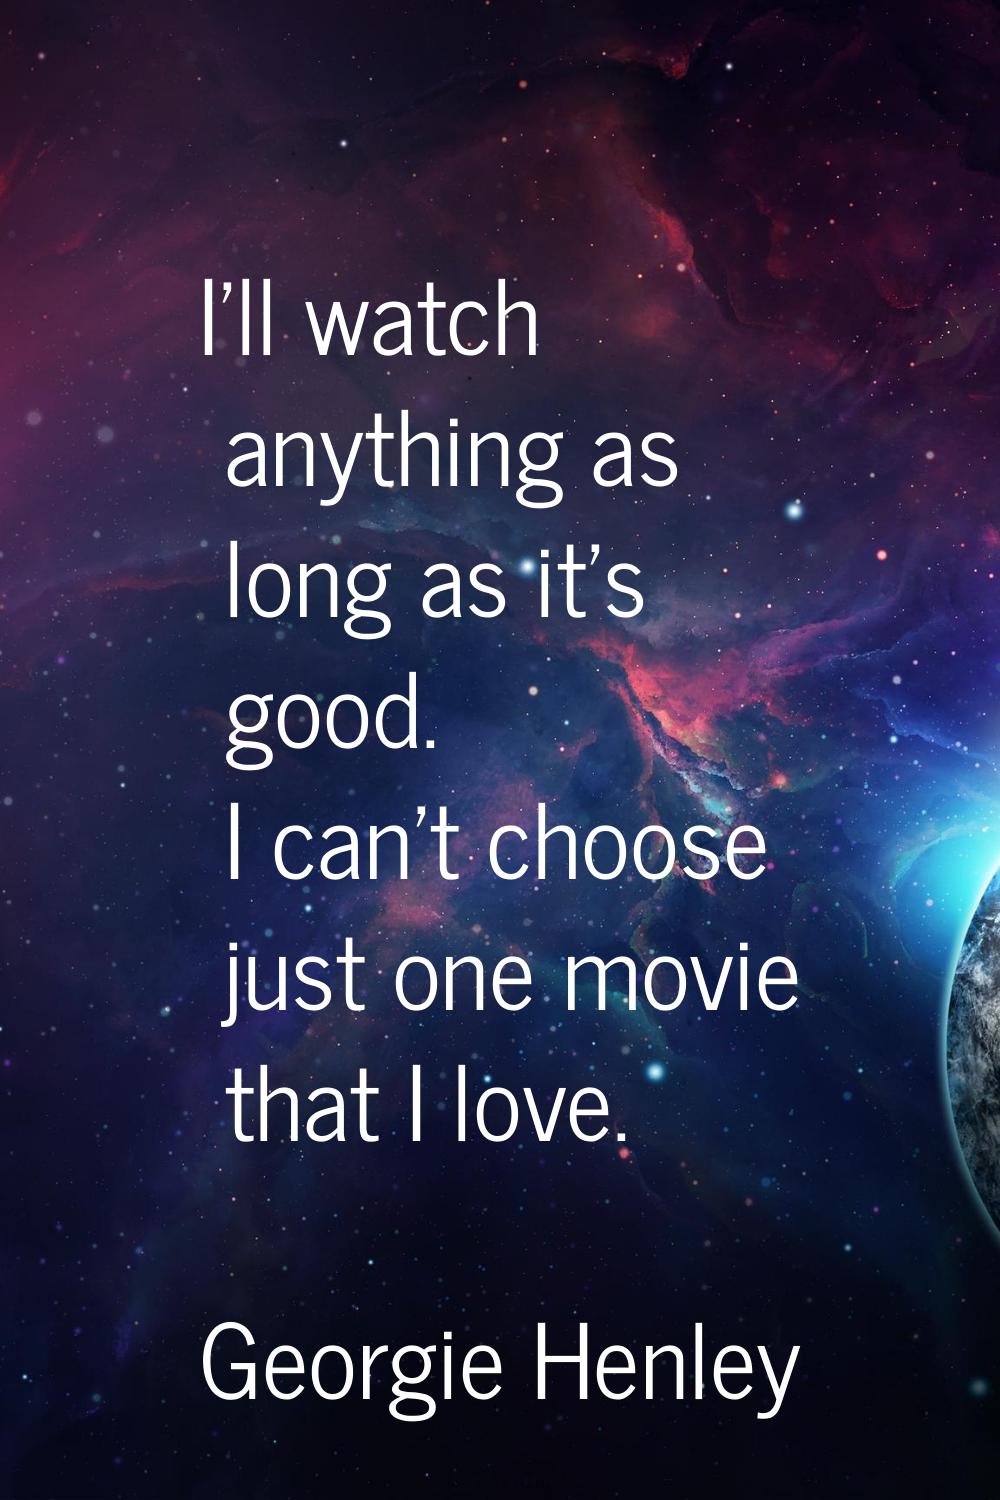 I'll watch anything as long as it's good. I can't choose just one movie that I love.